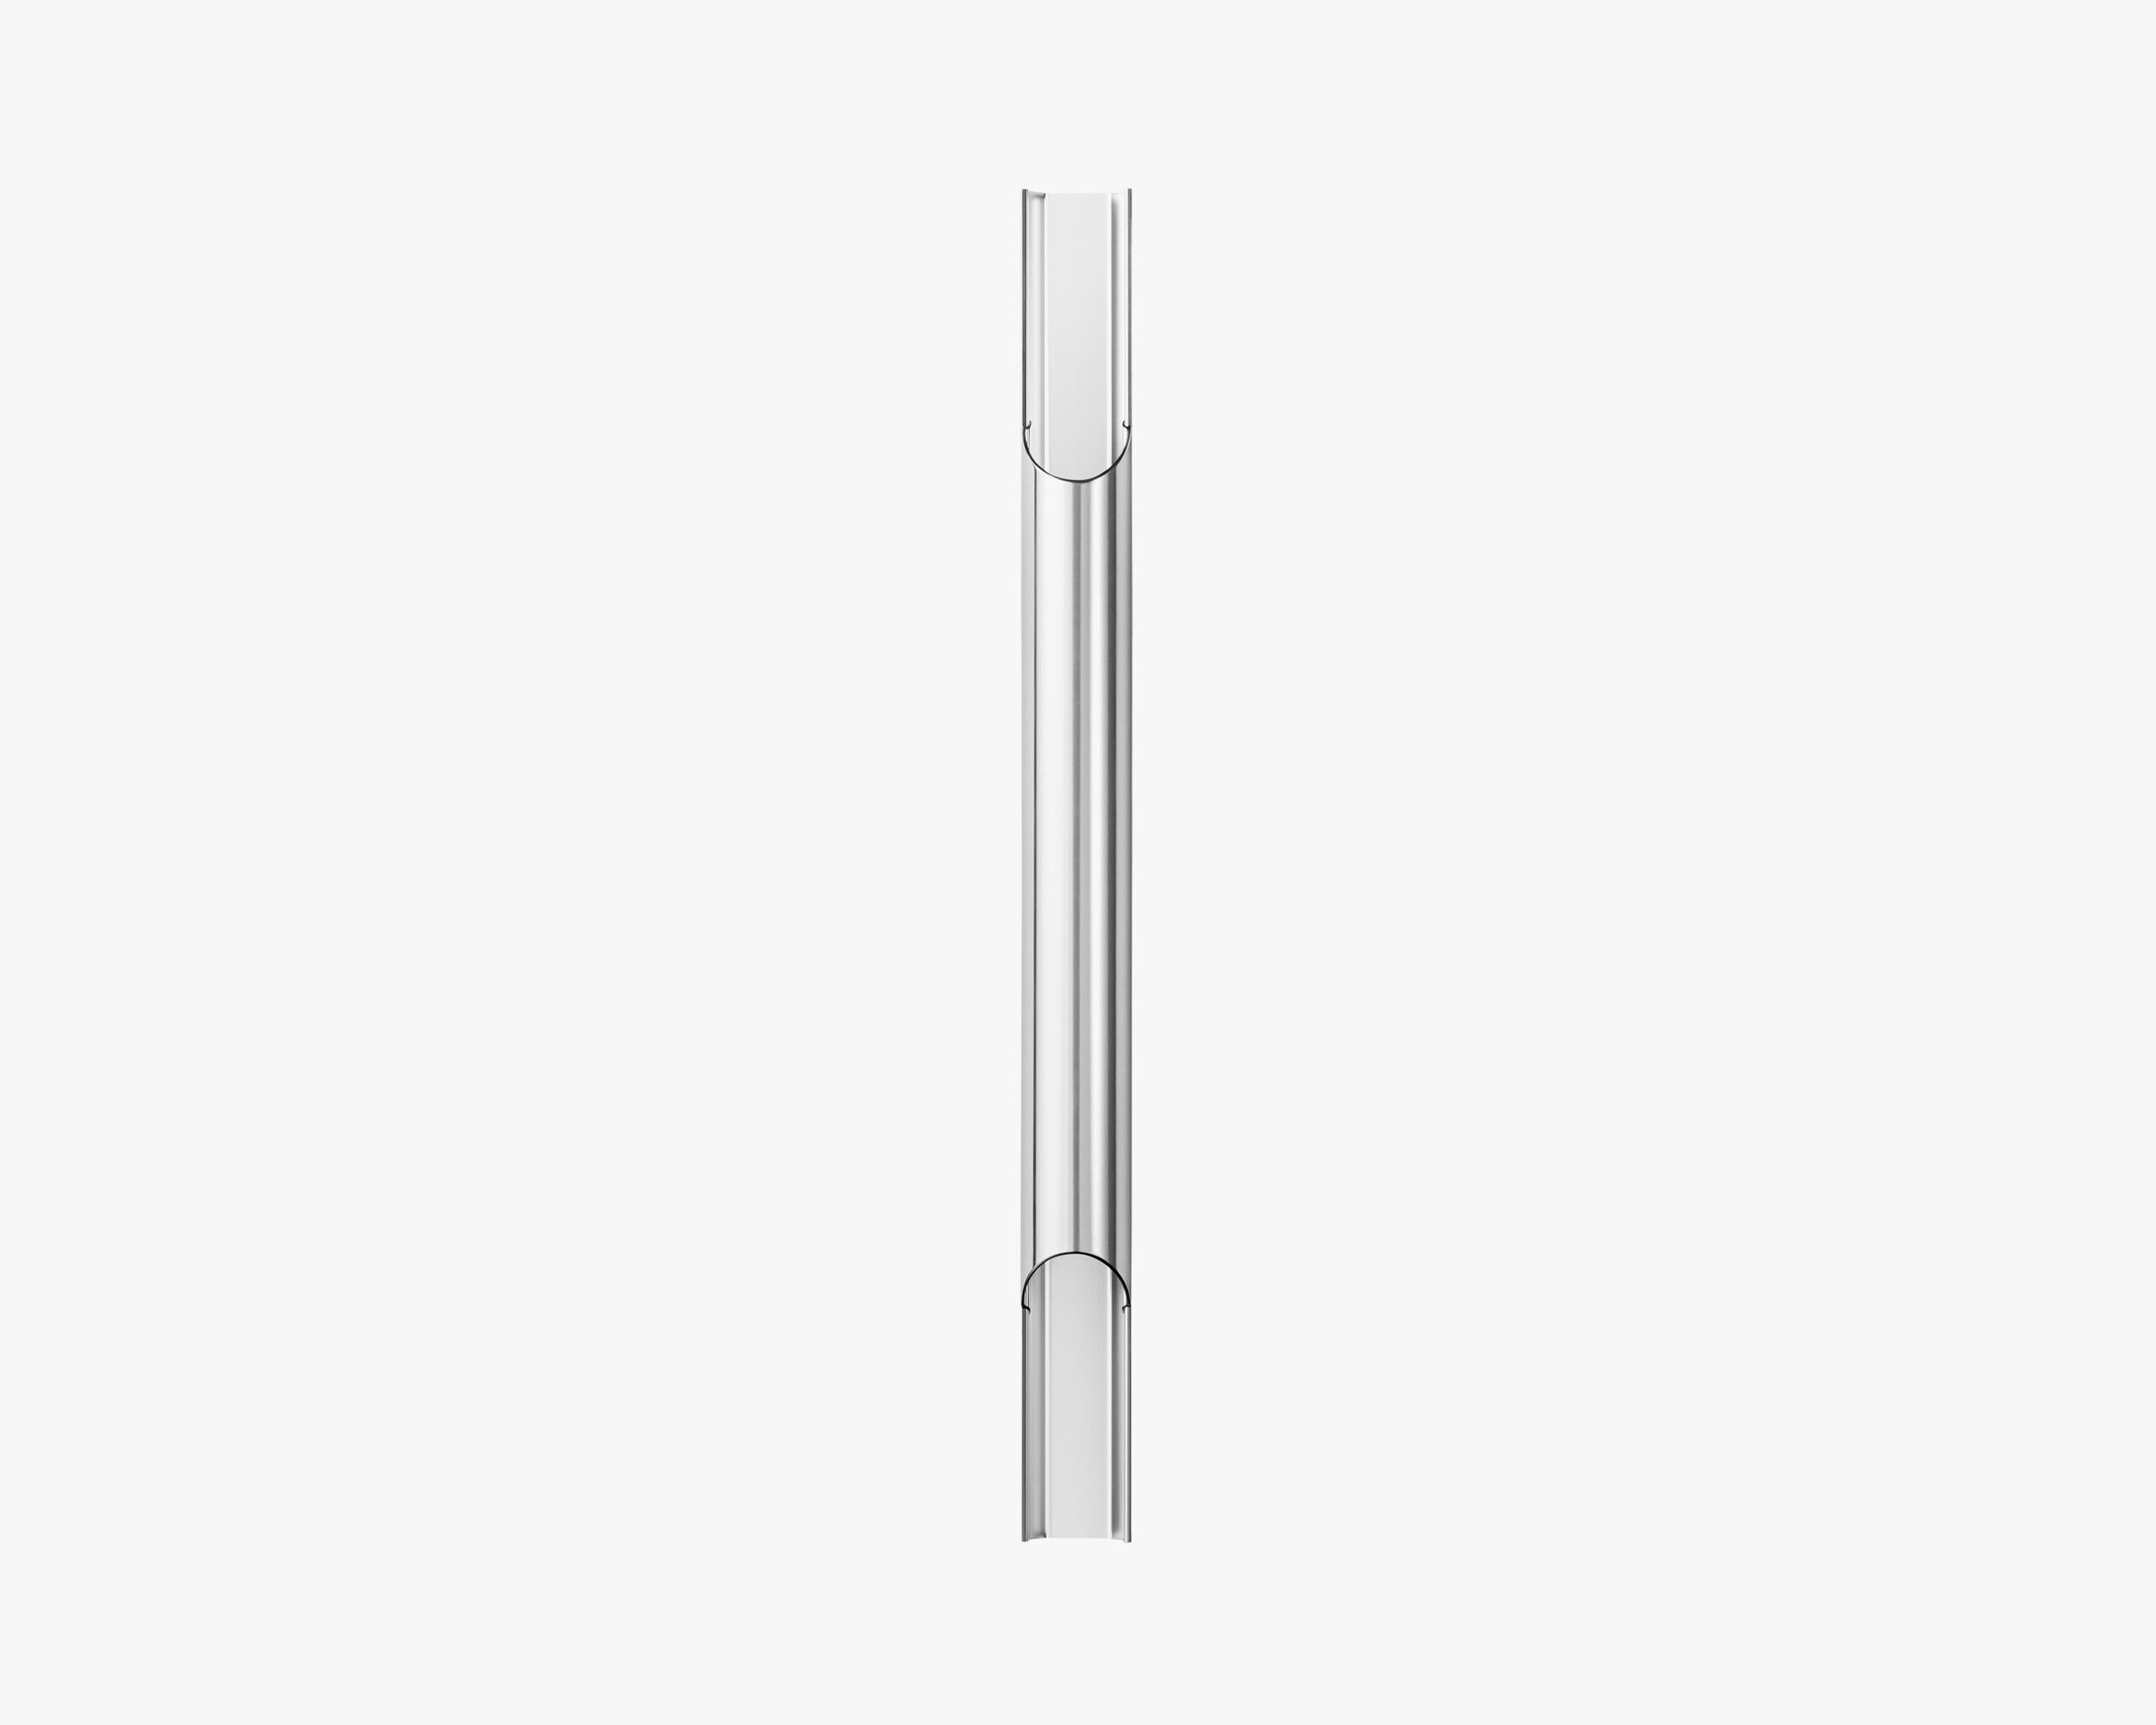 Wall lamp Pan / 50 by Lyfa
Wall lamp Pan / 50 signed by Bent Karlby for Lyfa

Polished aluminum
L.50 mm H.600 mm

Bulbs: 2 x E14 max 40W (110-230V)


Pan Wall 50 has two internal light sources. Pointing in each direction, they ensure that